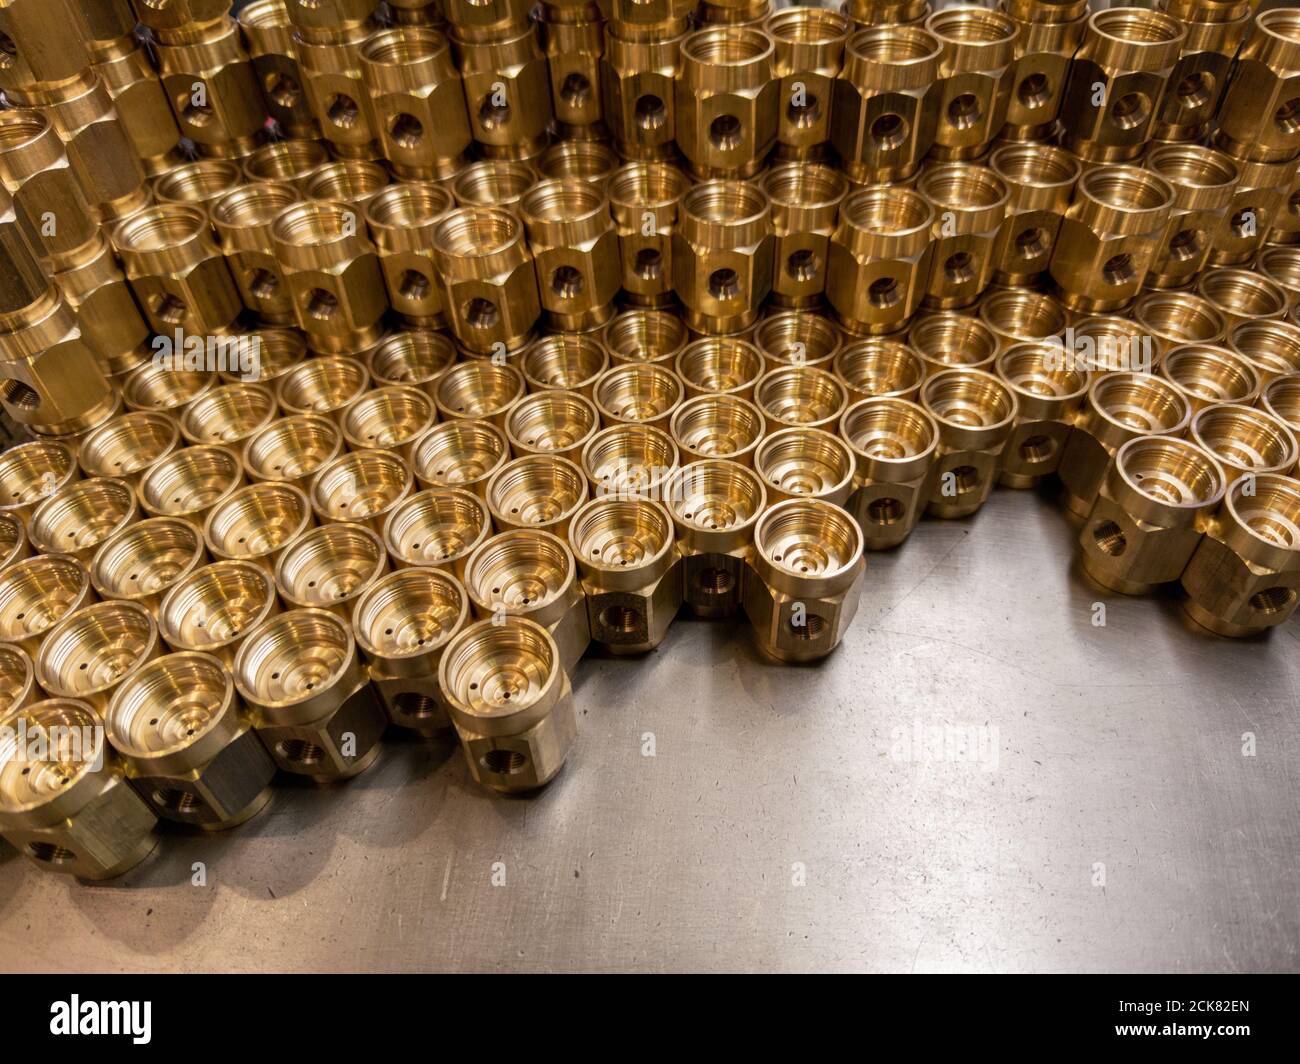 Shiny yellow metal parts background. Shiny brass metal threaded hexagonal parts after turning and machining. Stock Photo